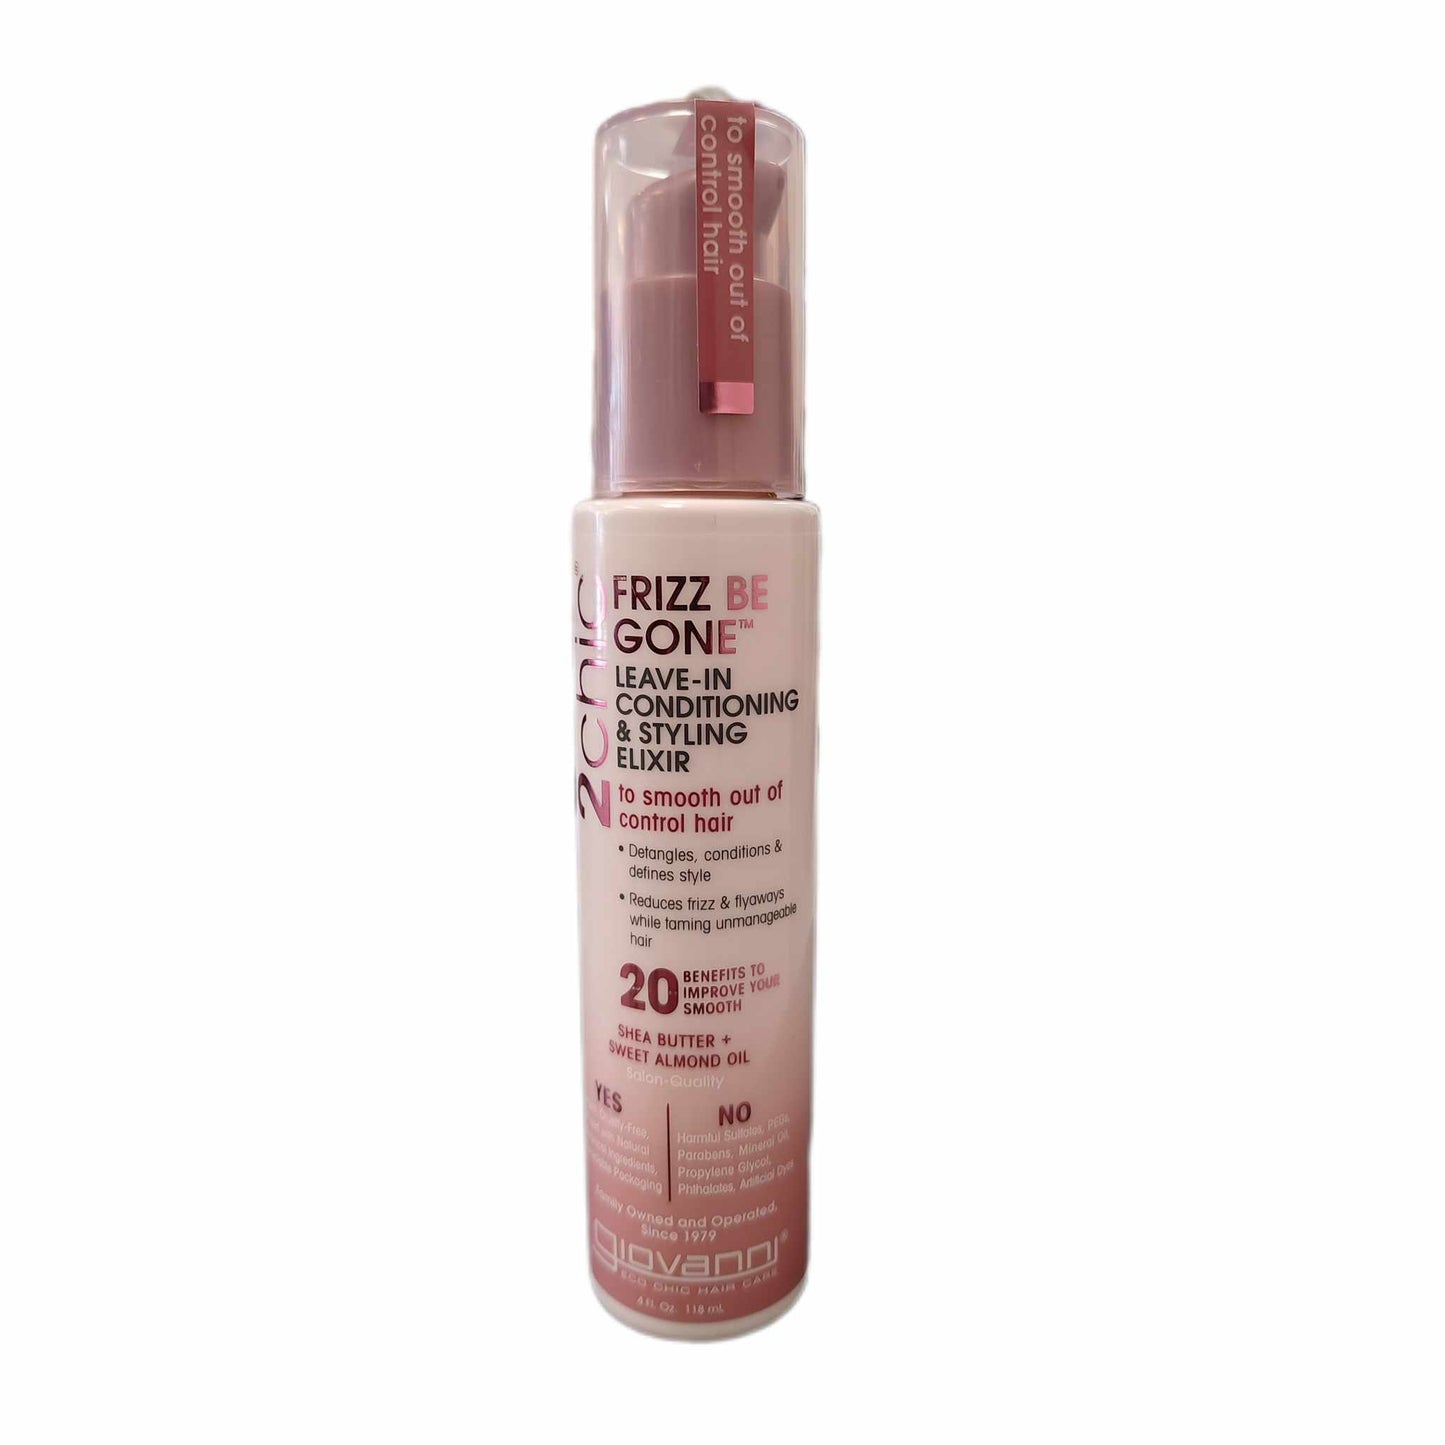 Giovanni 2chic® FRIZZ BE GONE™ Leave-In Conditioning & Styling Elixir